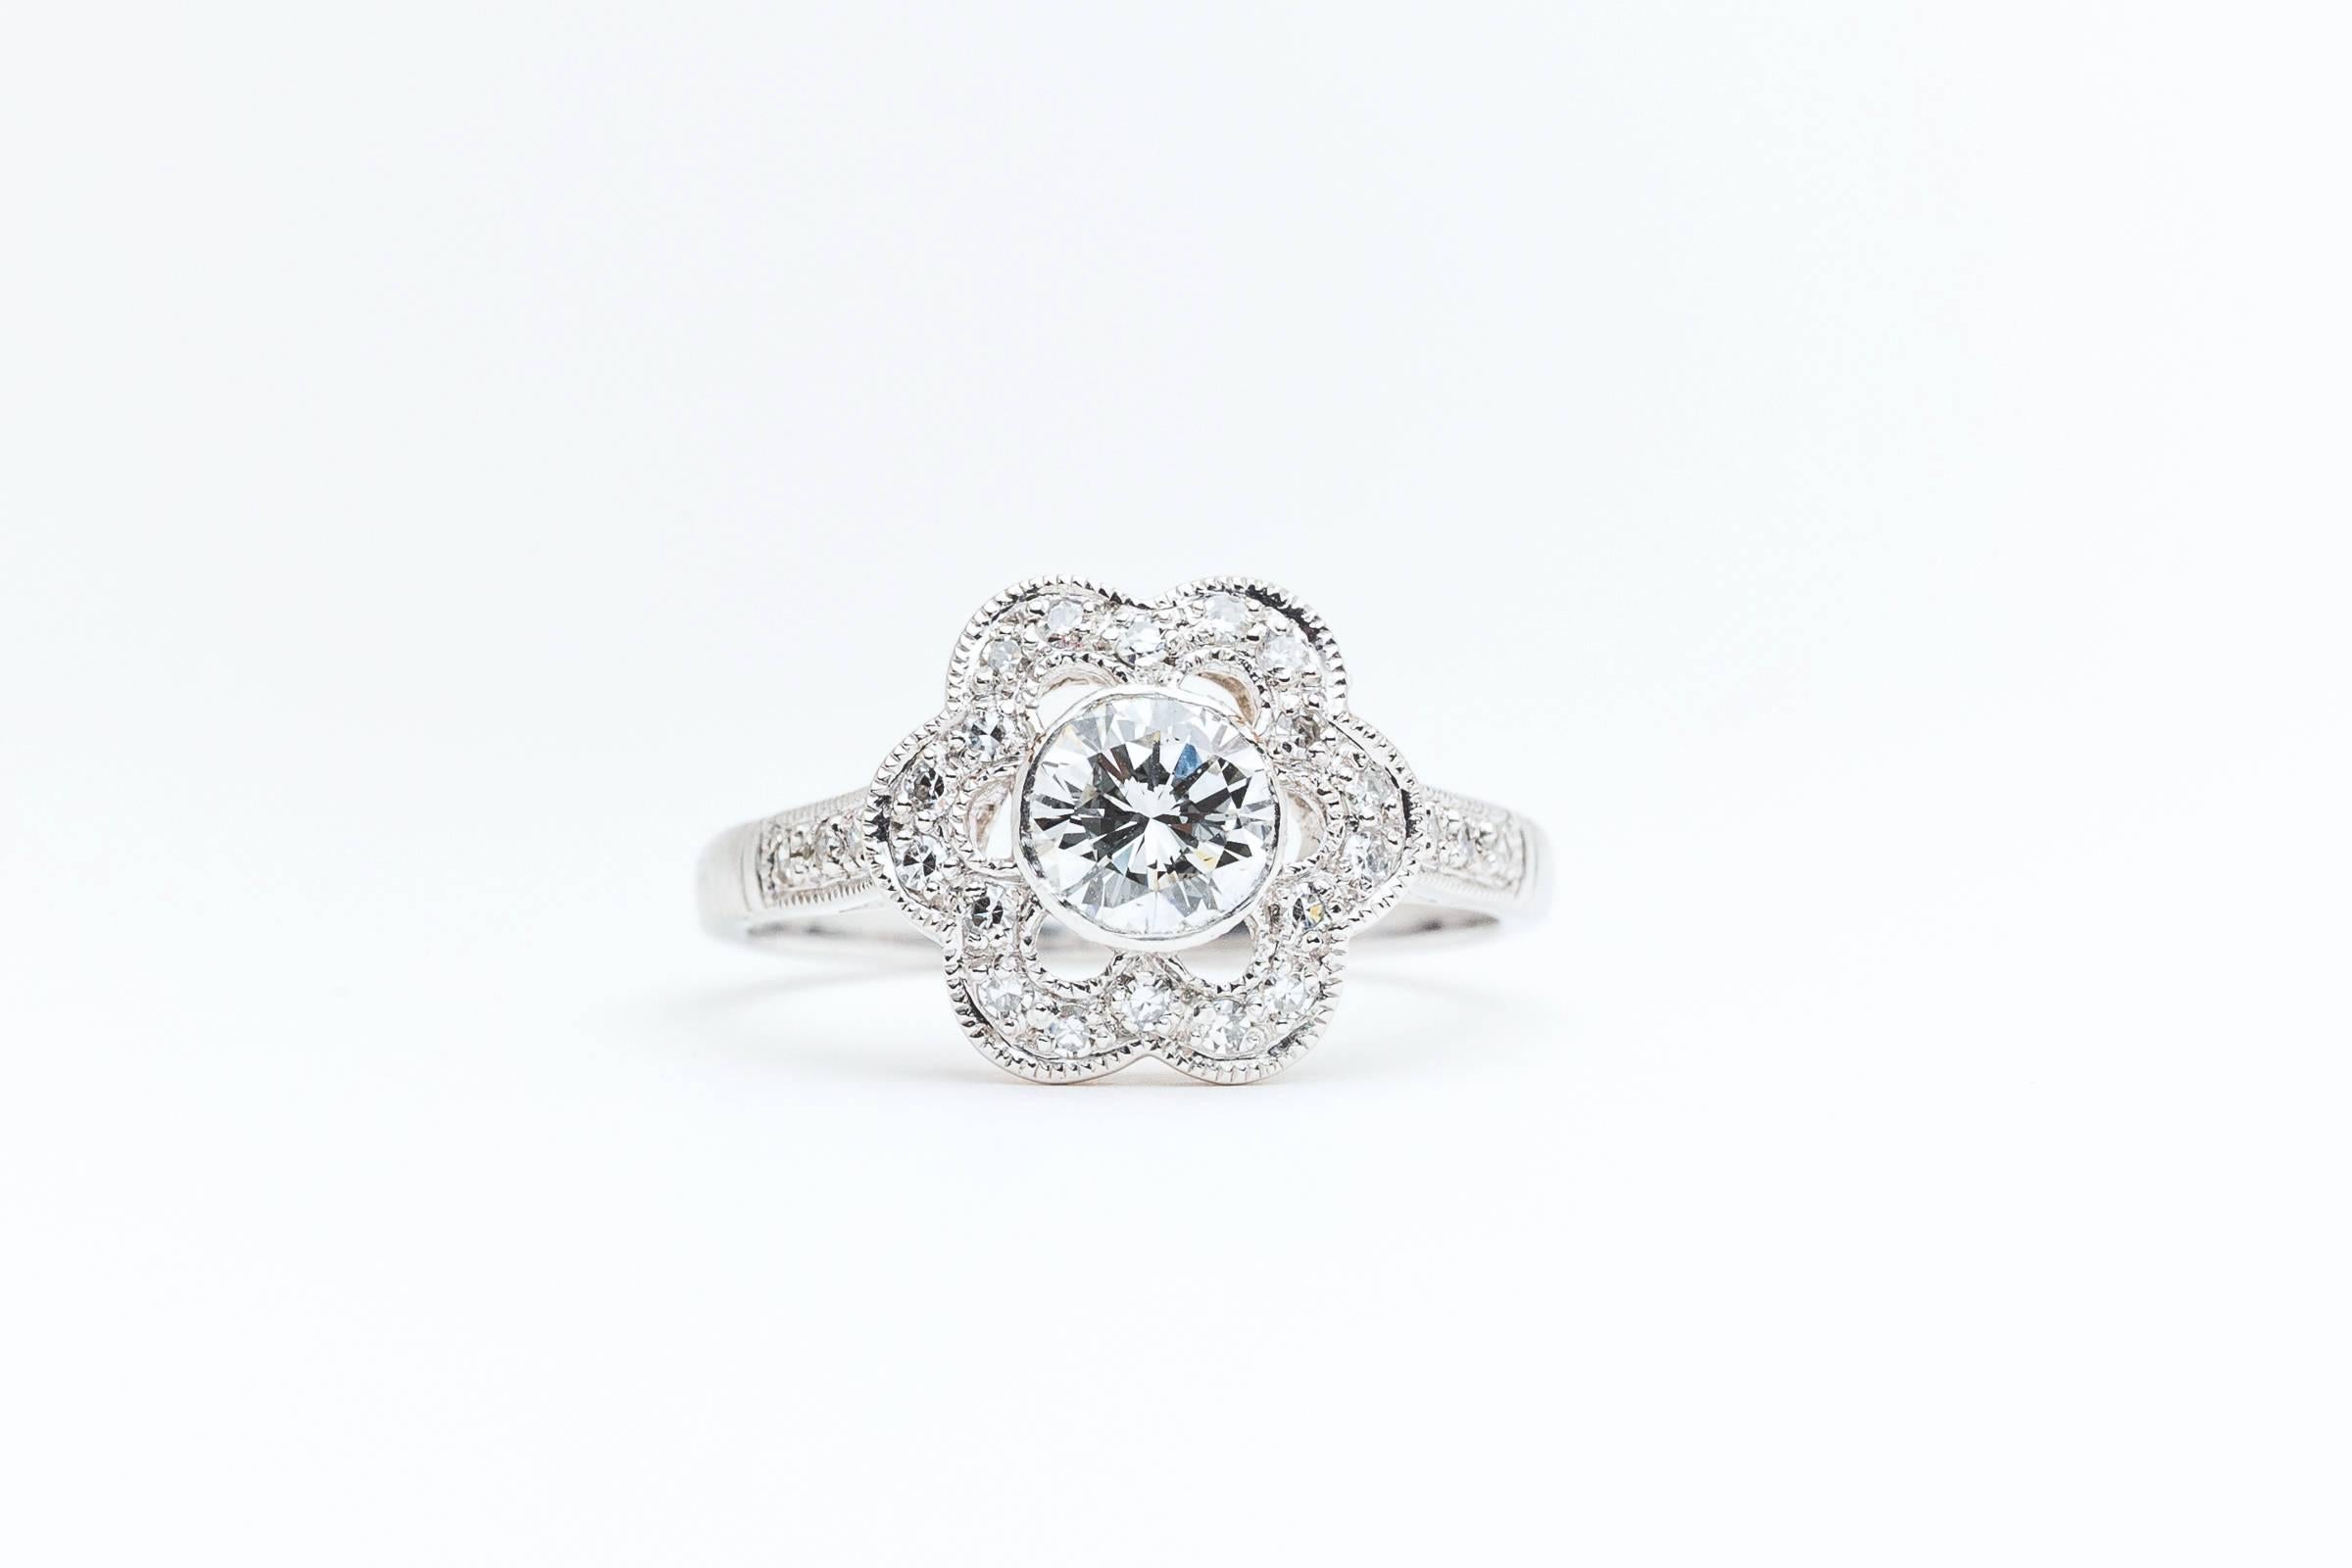 A beautiful flower form platinum and diamond engagement ring. Centered by a bezel set round brilliant cut 0.58 carat diamond, this beautiful flower features hand formed diamond studded petals.

Set in a brightly polished bezel of luxurious 900 fine